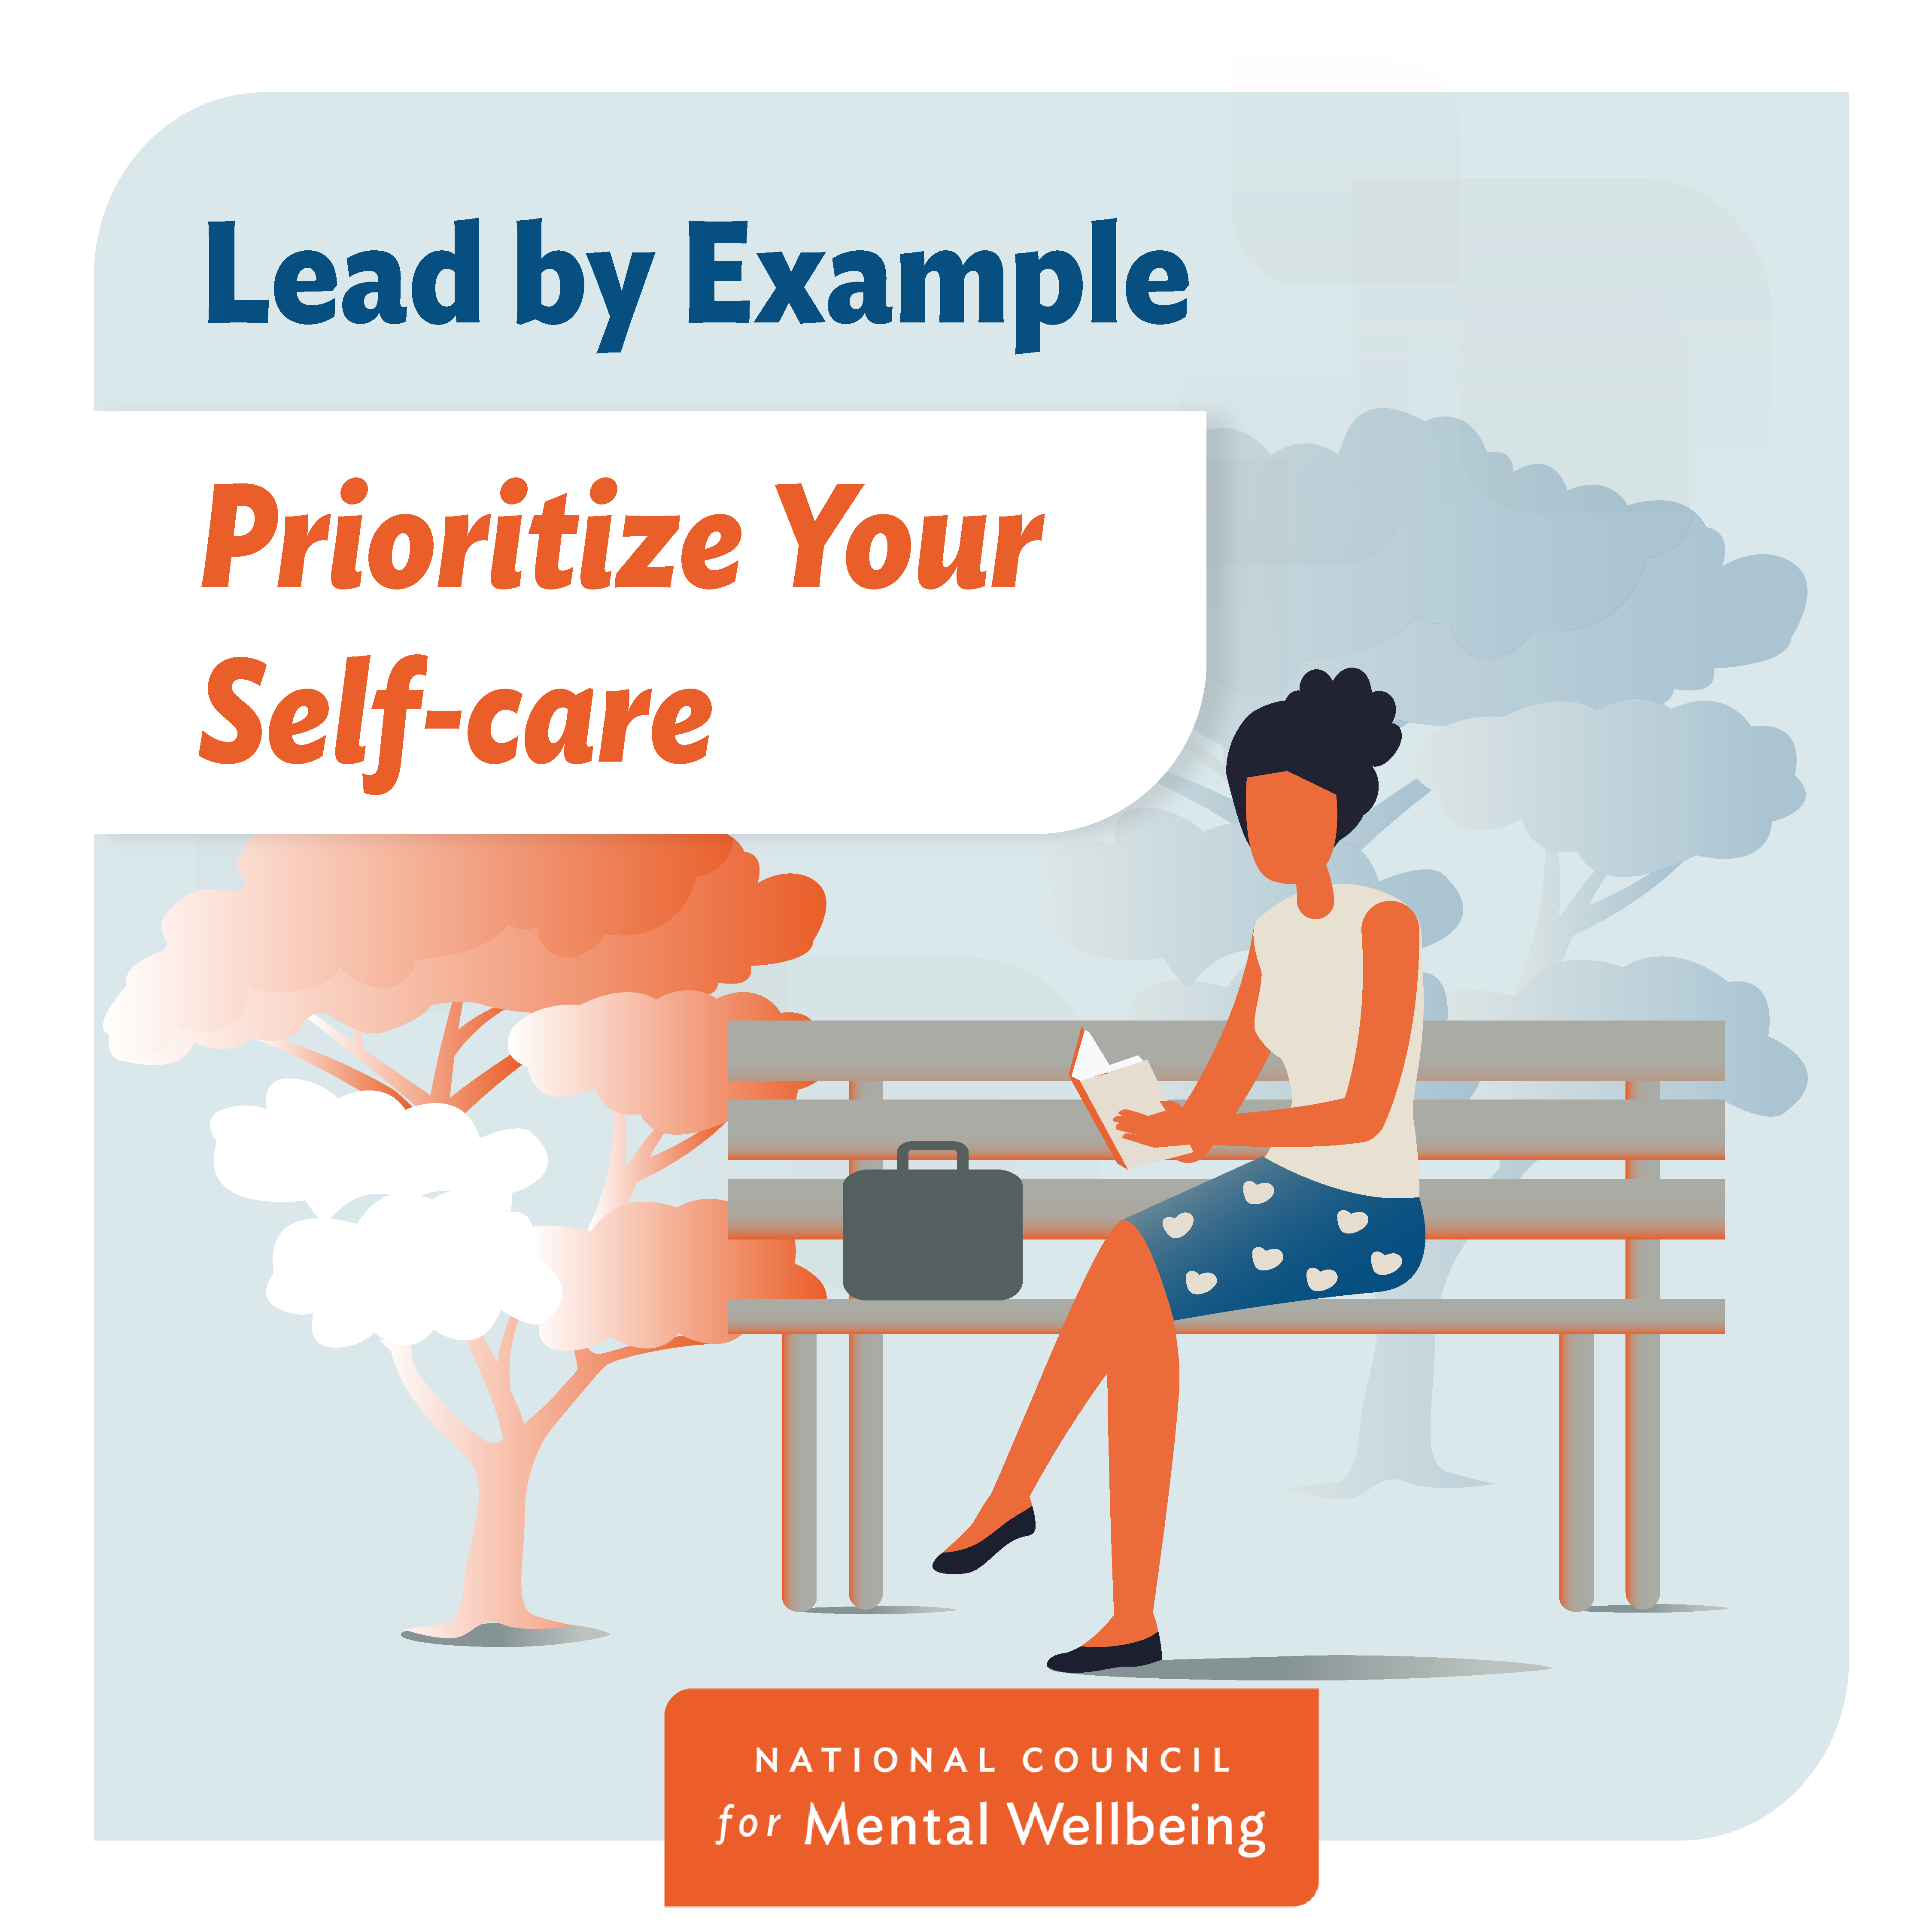 Lead by Example, Prioritize Your Self-care